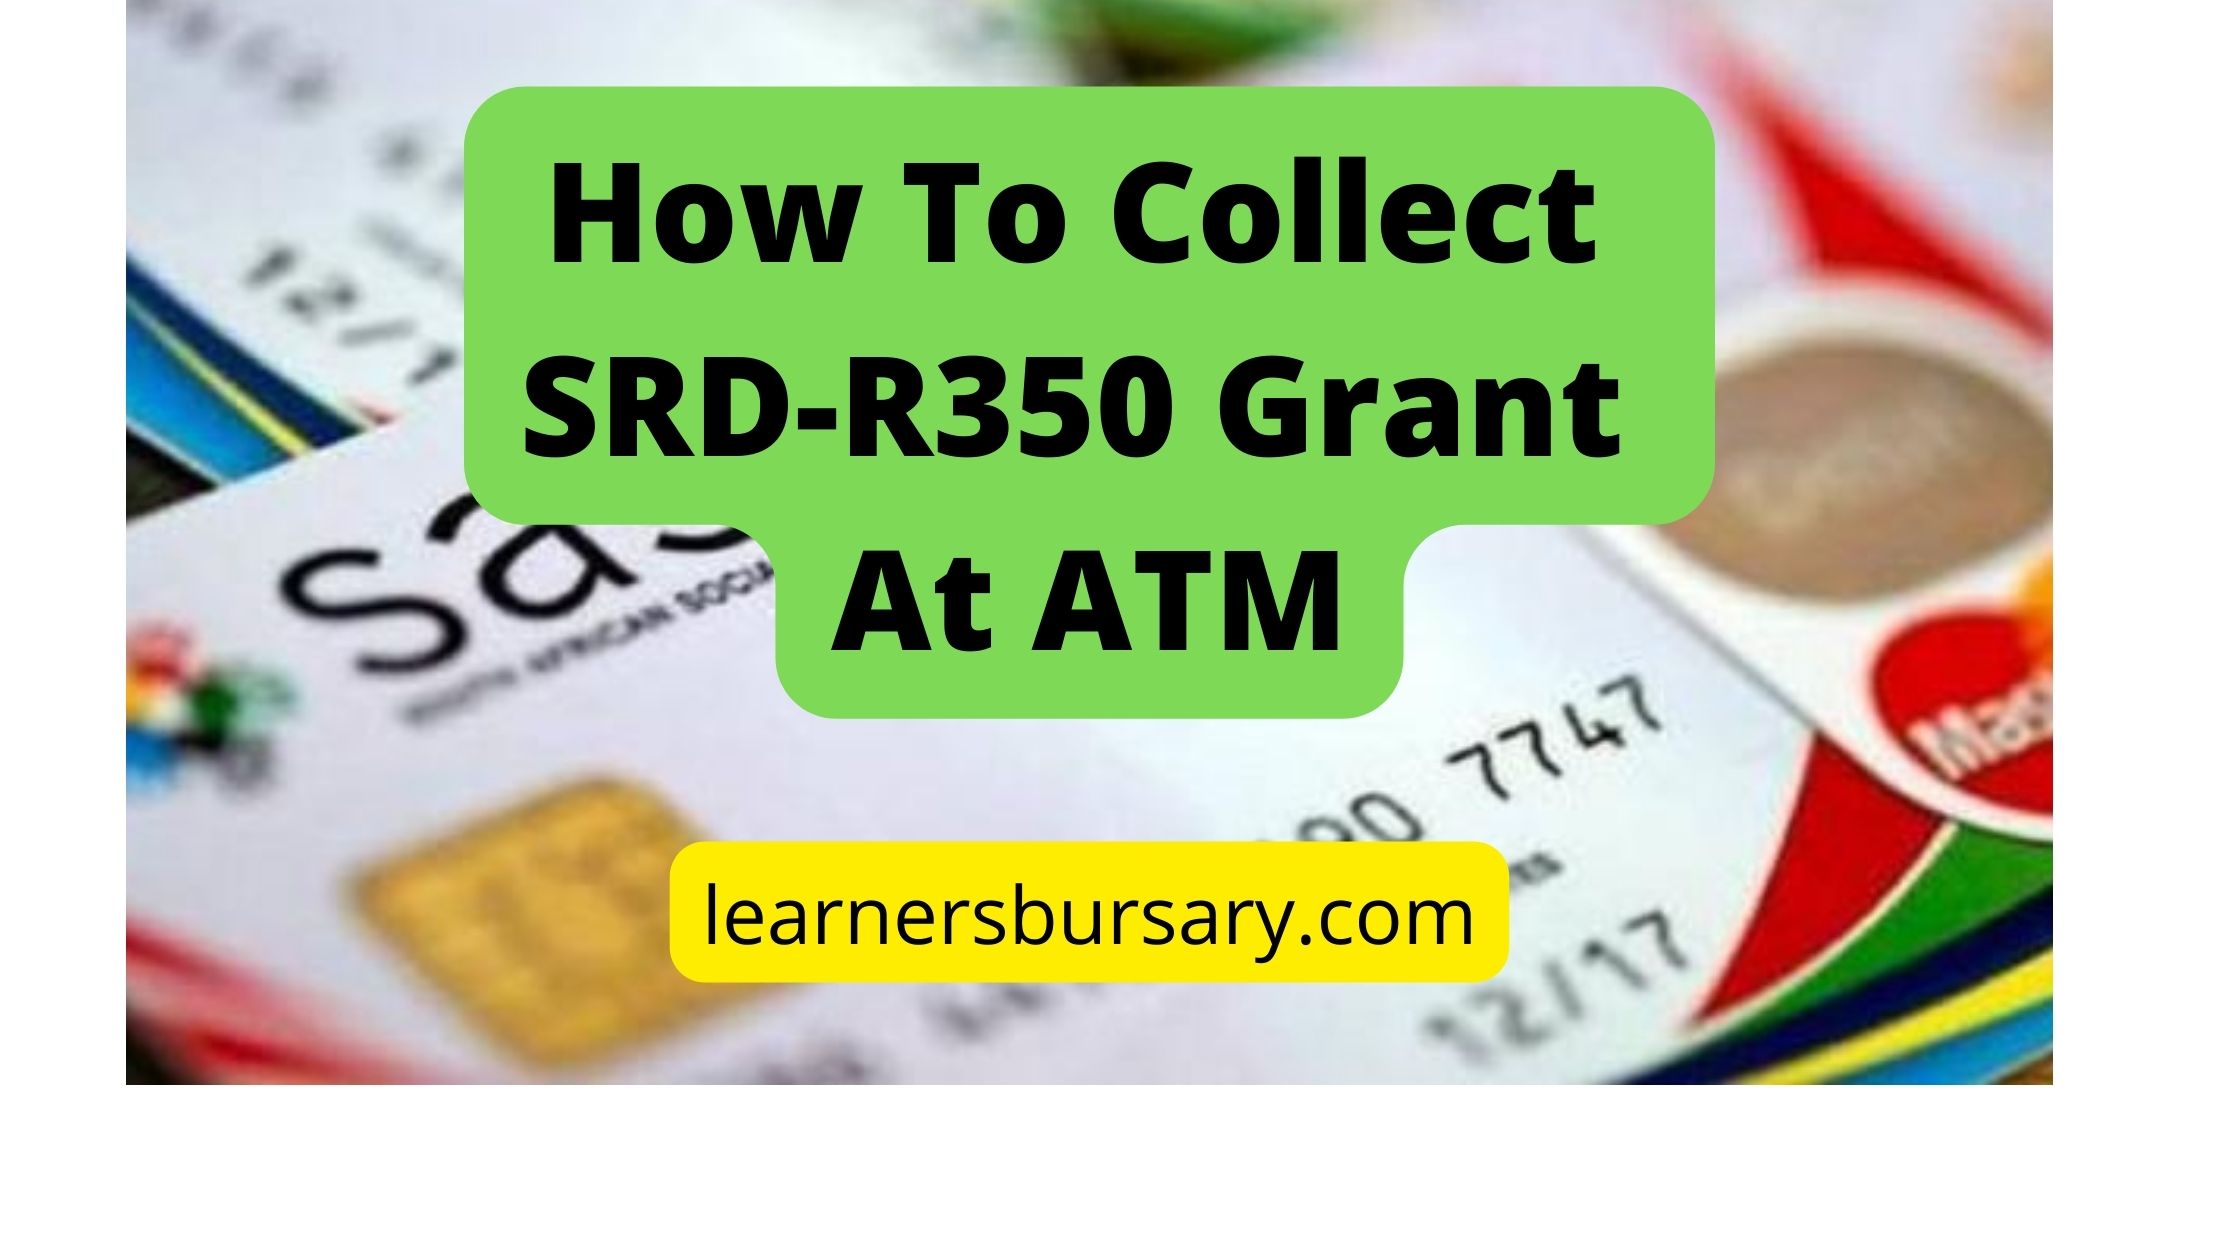 How To Collect SRD-R350 Grant At ATM